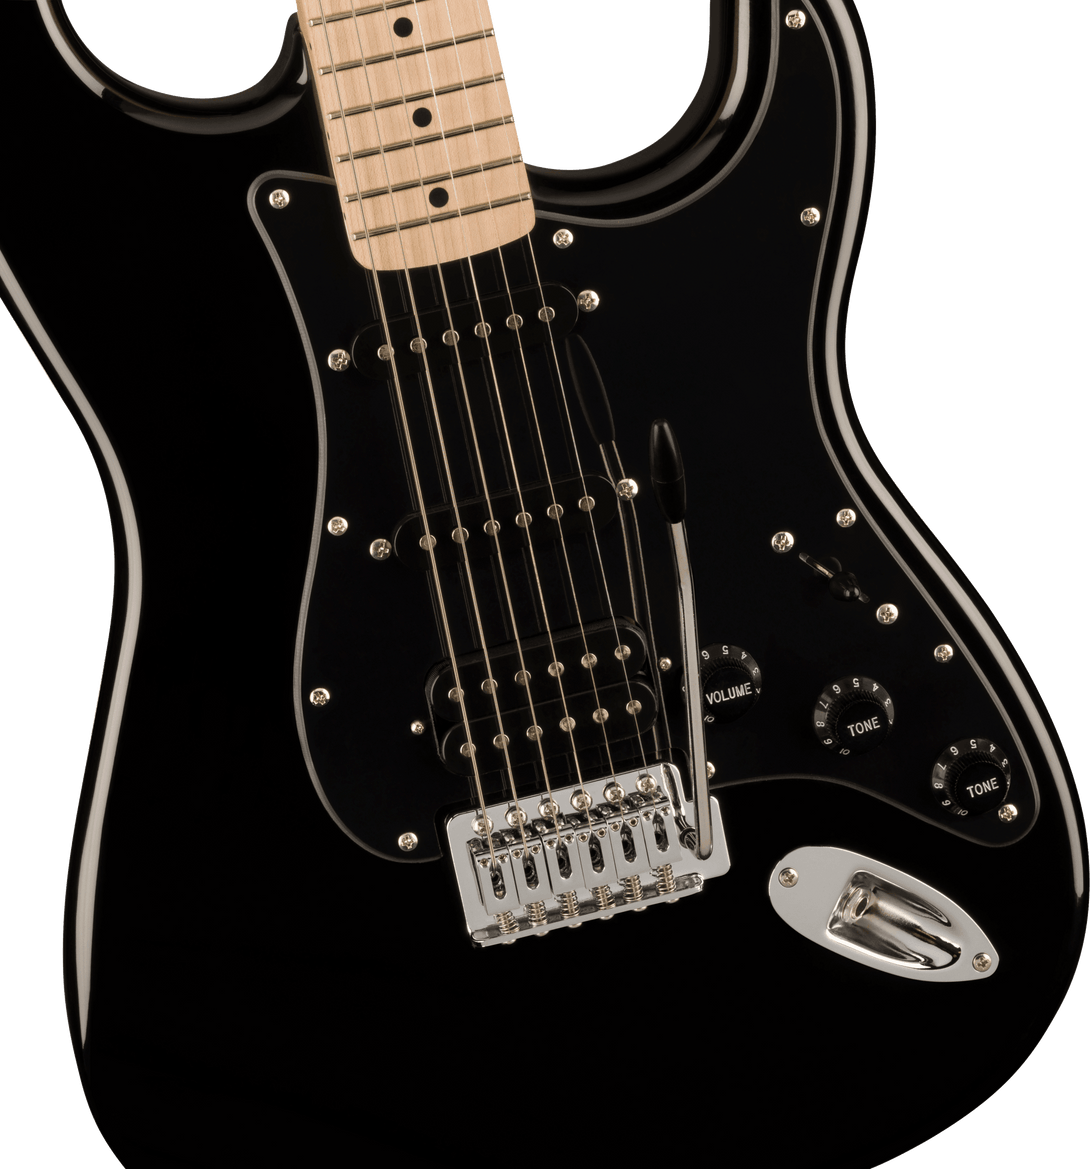 Guitarra Eléctrica Fender Squier Sonic Stratocaster HHS 0373203506 - The Music Site